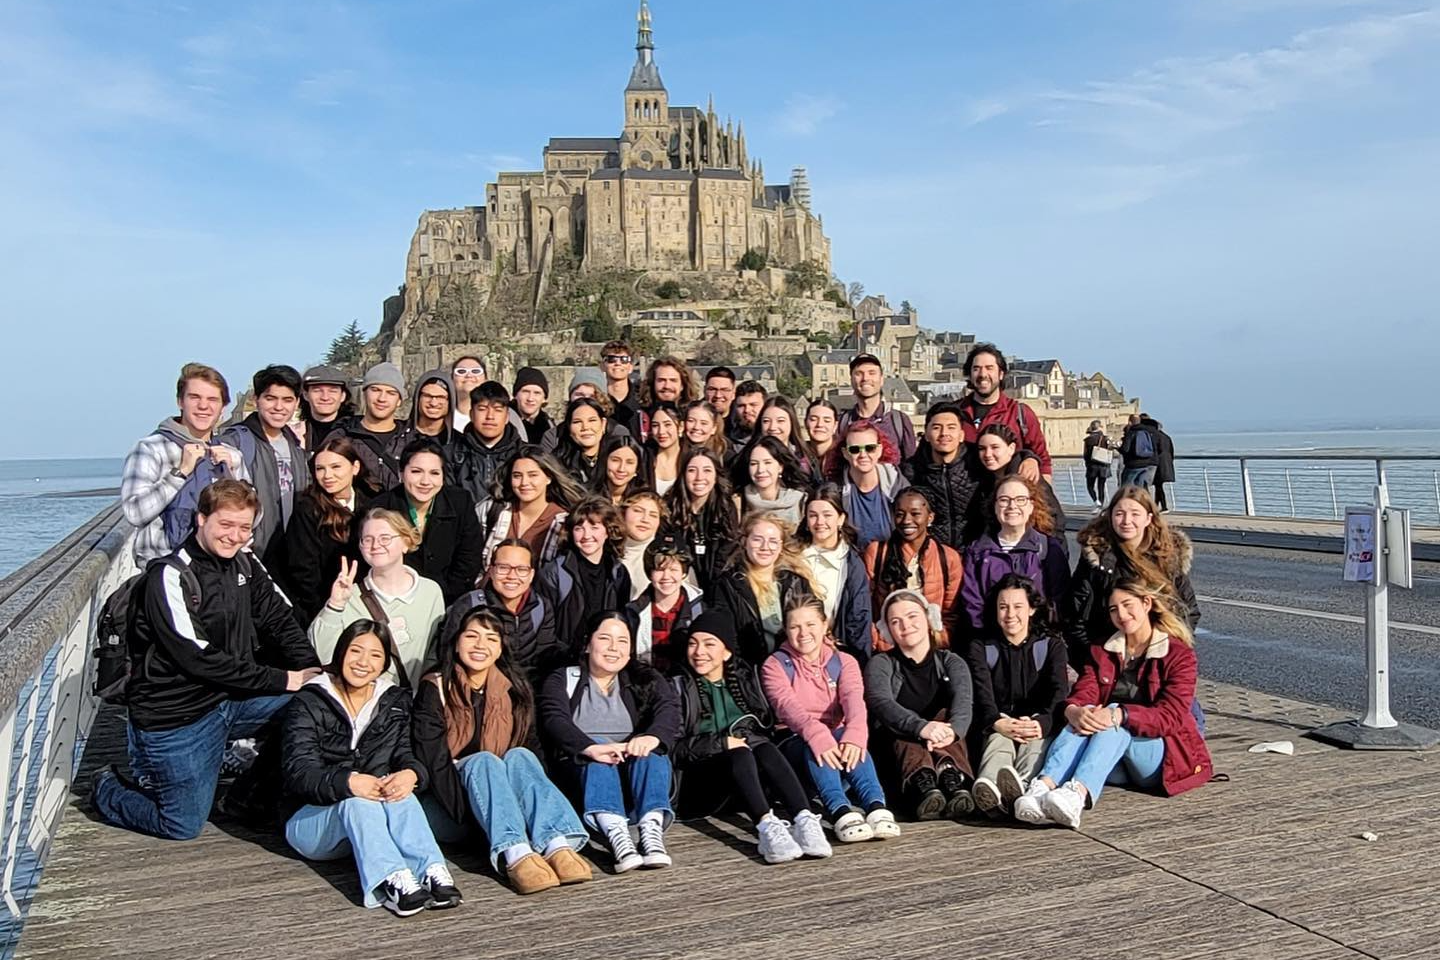 A large group of students pose for a photo on a pier with Mont Saint-Michel in the background.